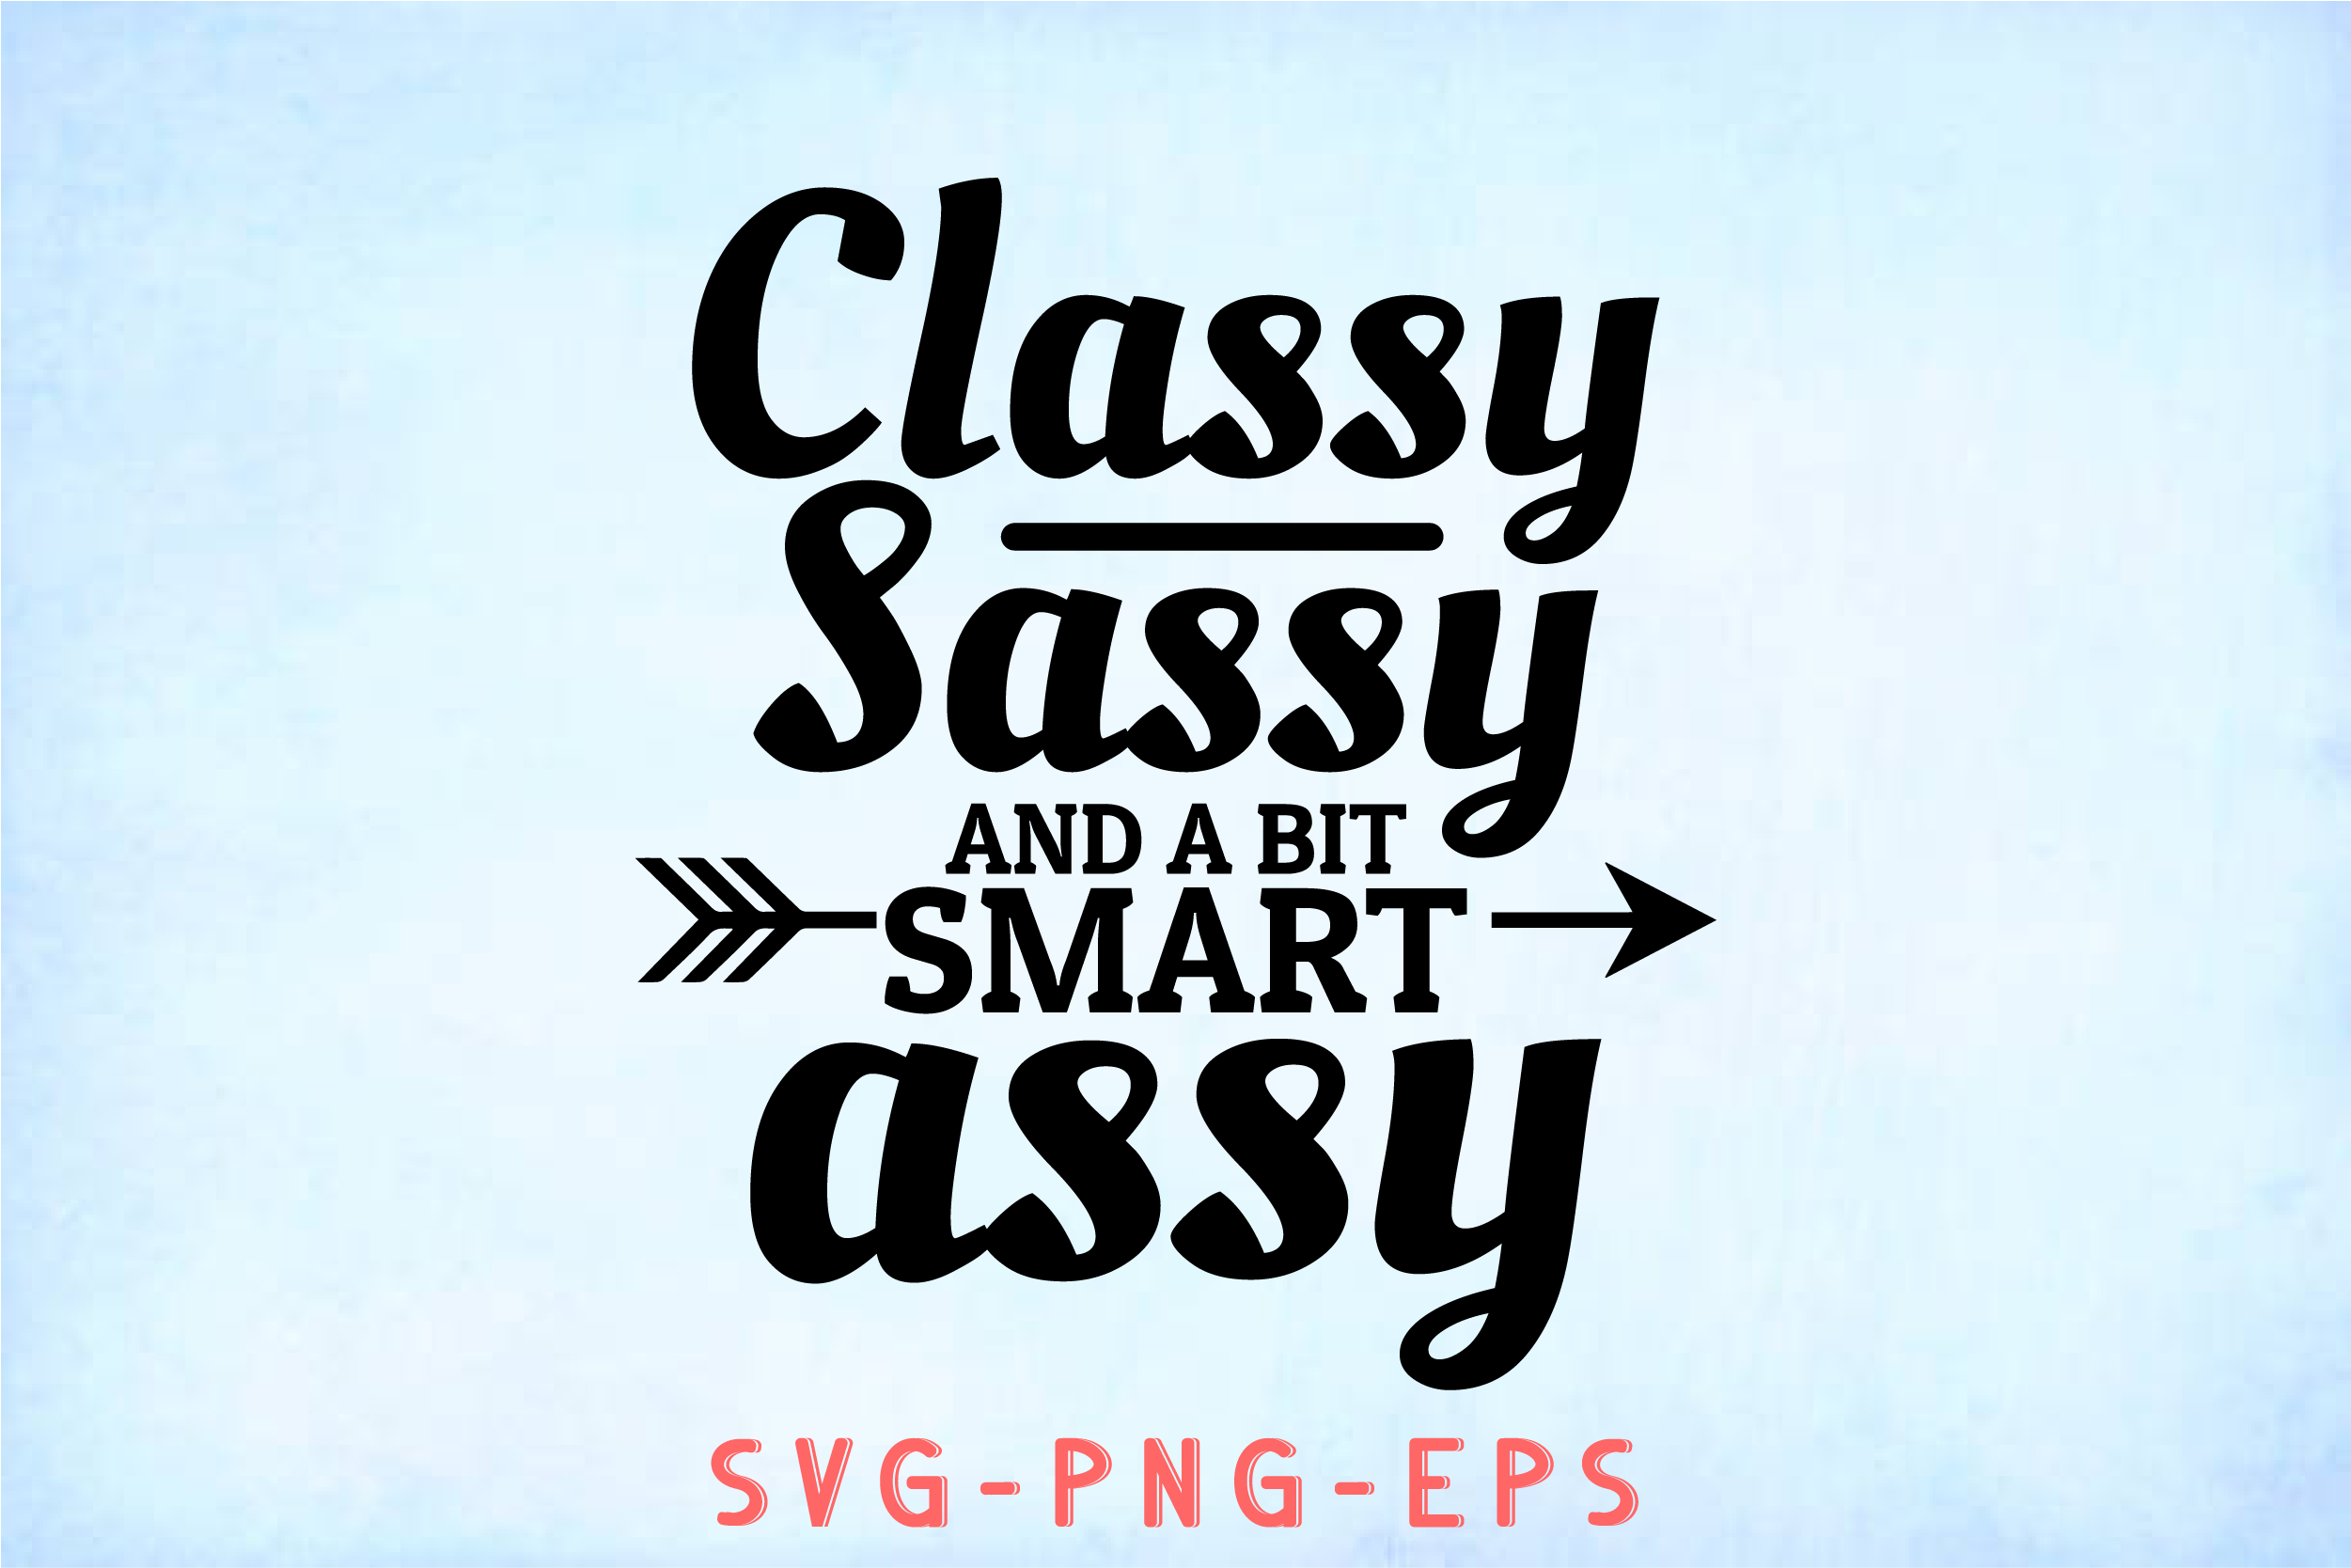 Classy Sassy And A Bit Smart Assy Graphic By Sapphire Art Mart